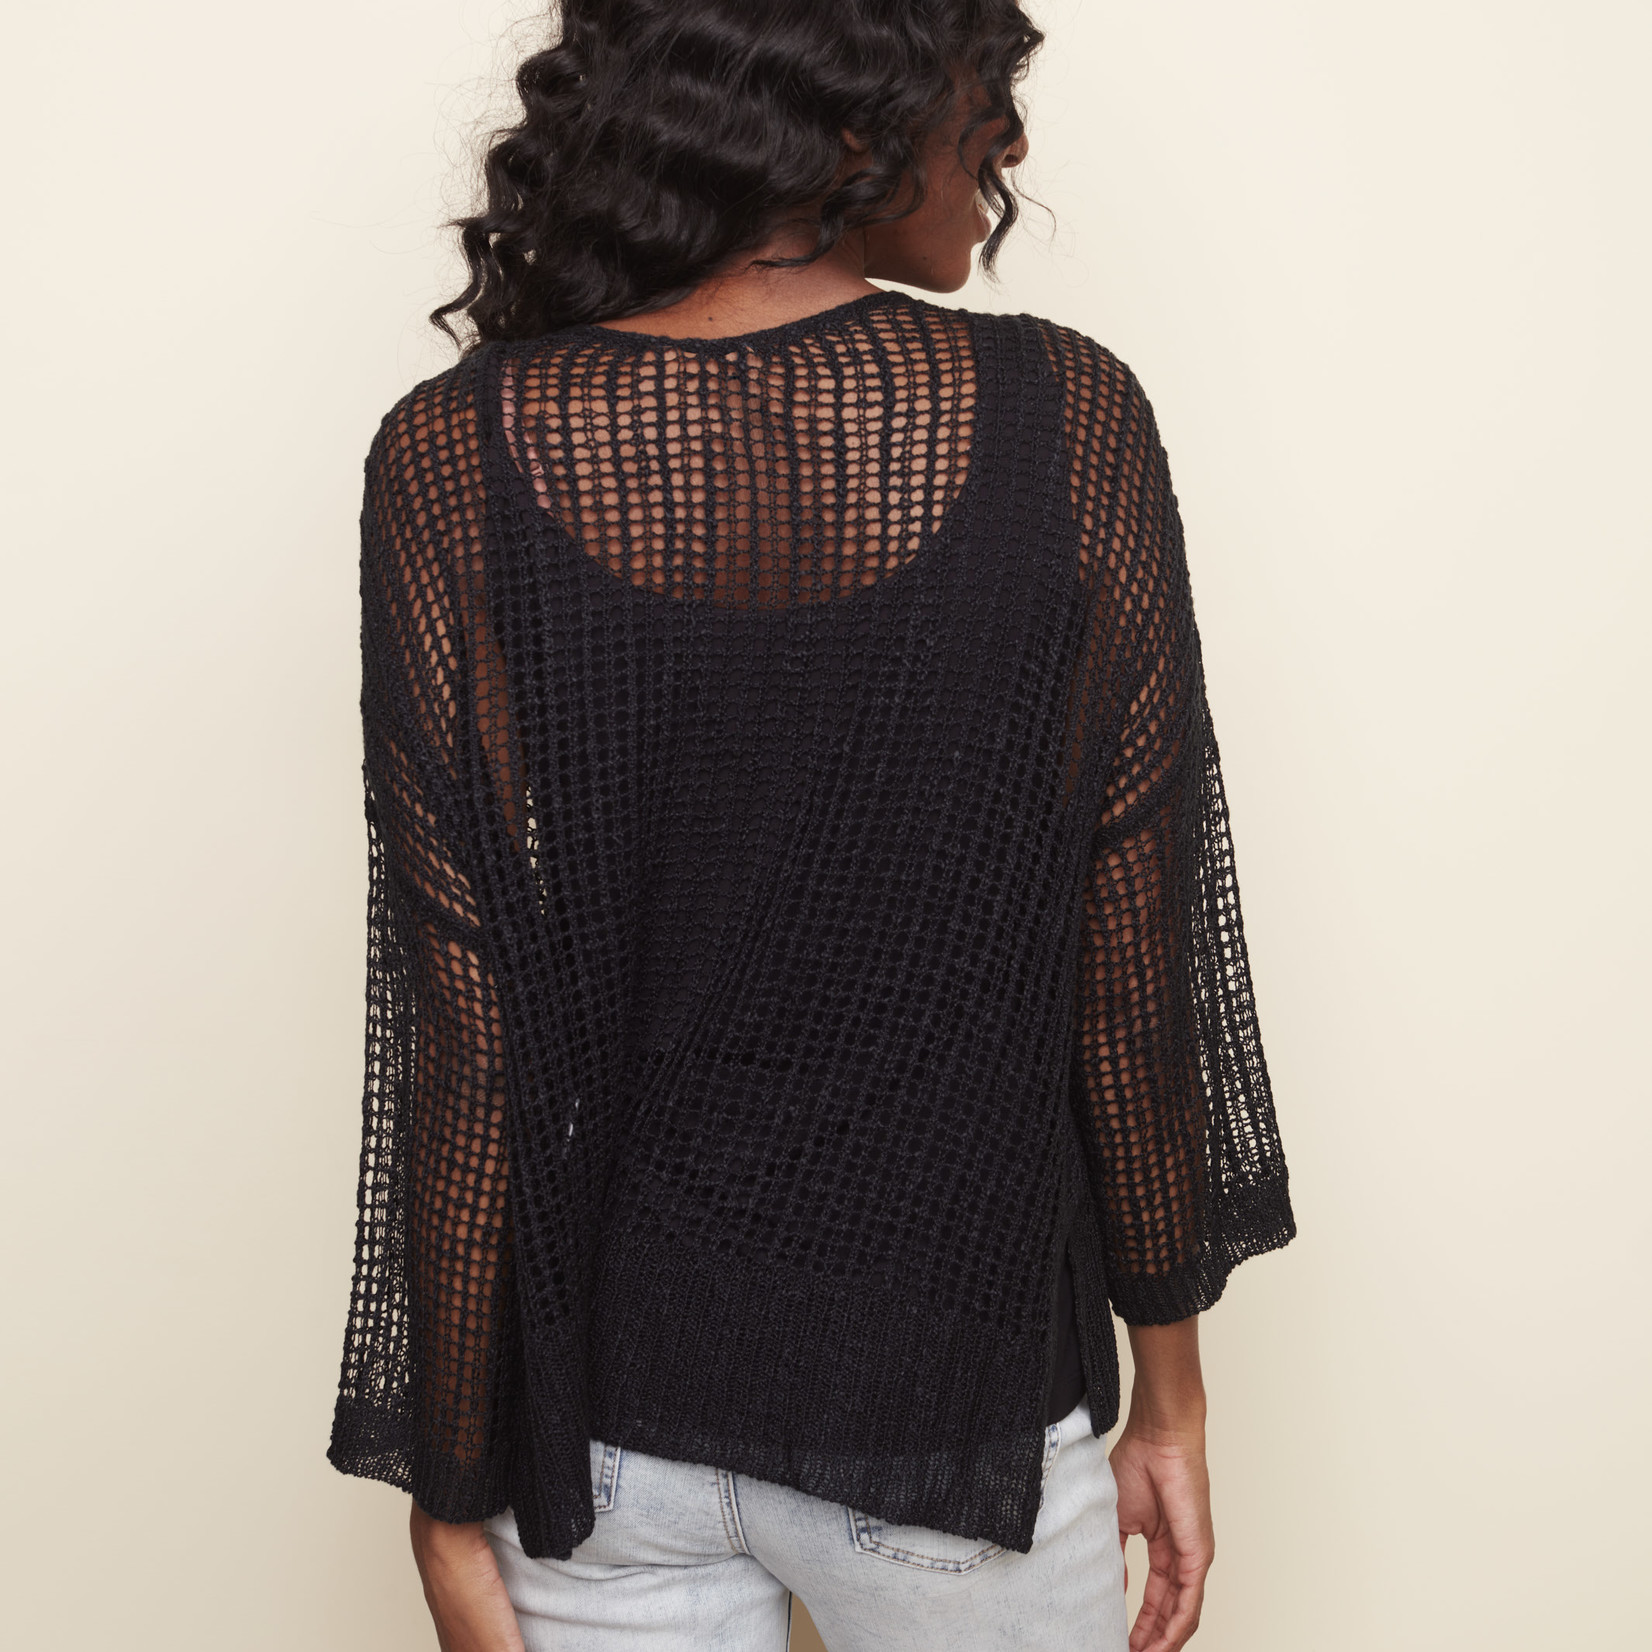 Charlie B Collection Crochet Knit Sweater